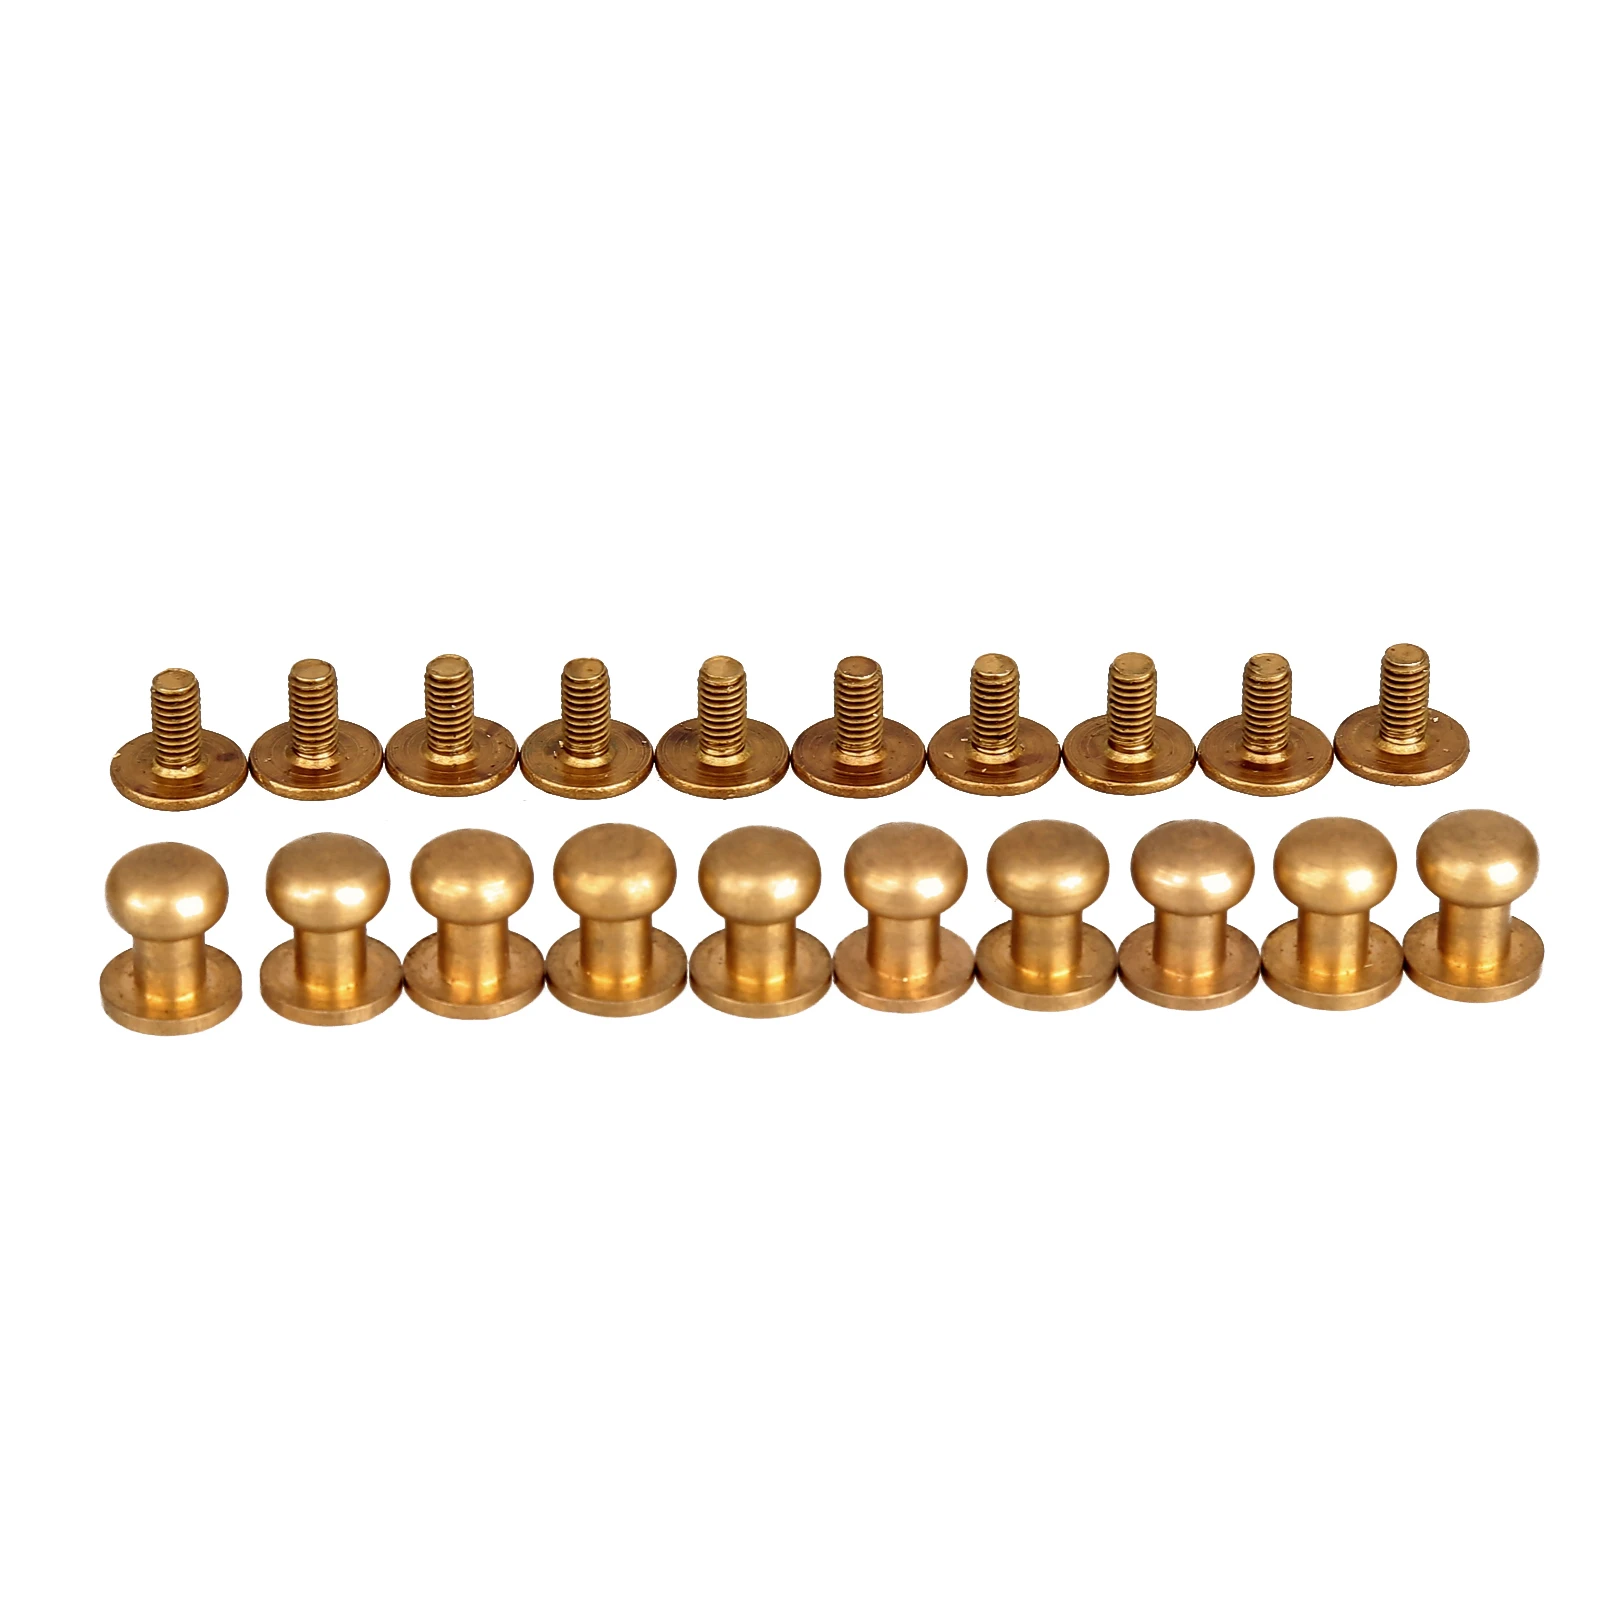 10Pcs Pure Brass Screw Button Round Head Rivet Stud Bag Snap Clasps Buckle Fastener Sewing Garment Leather Craft 5/6/7/8/9/10mm